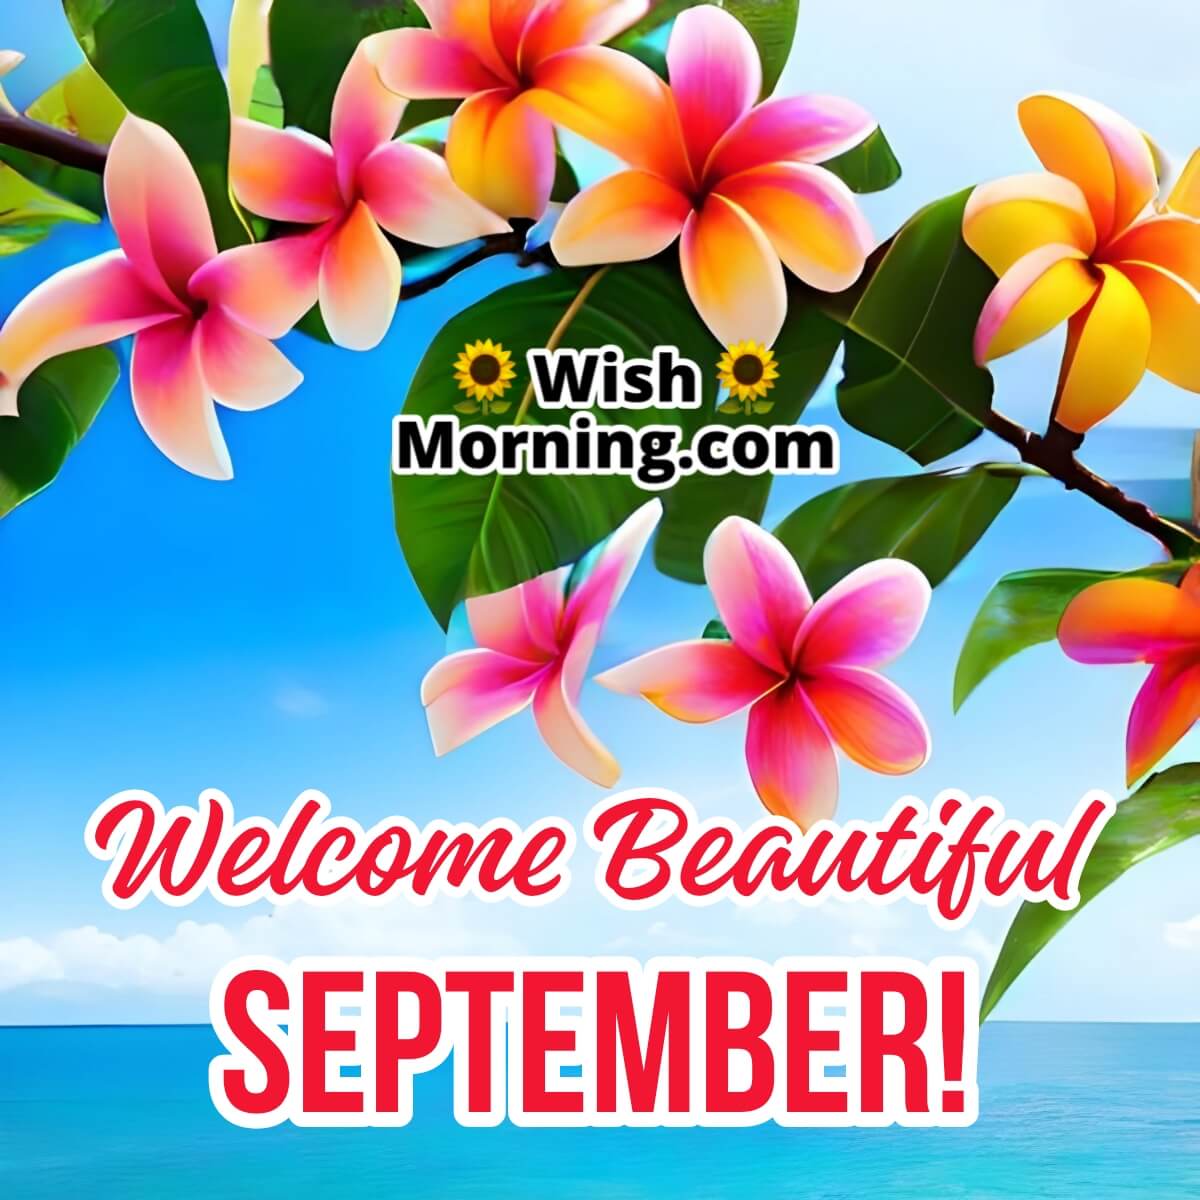 Welcome Beautiful September